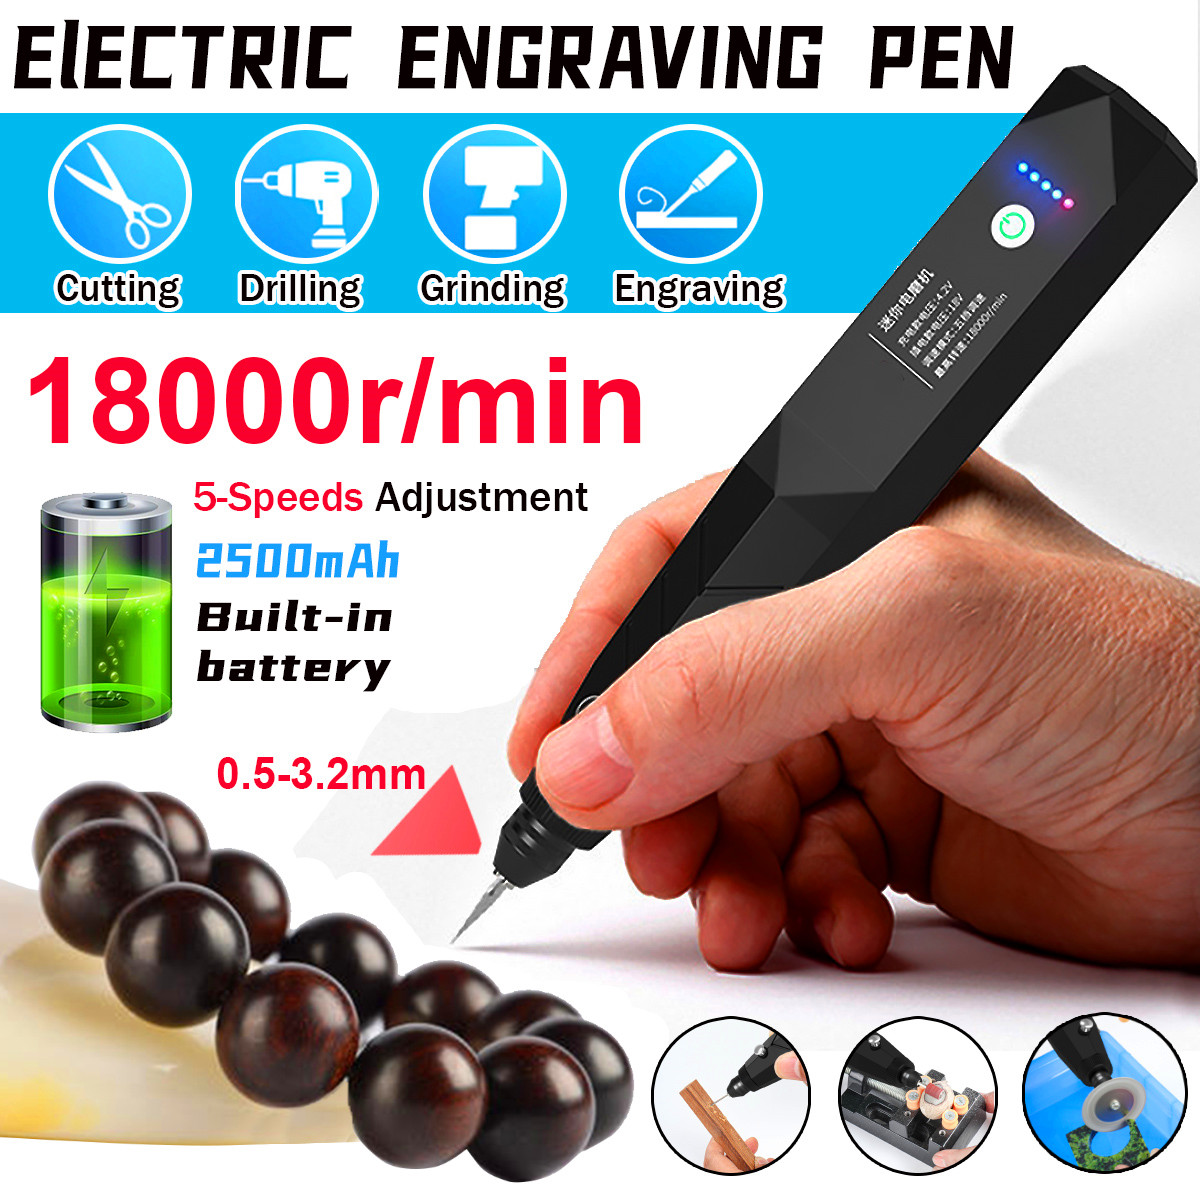 Rechargeable-5-Speed-Power-Adjustable-Electric-Engraving-Pen-18000rMin-Metal-Jade-Carving-Marking-Ma-1750287-1